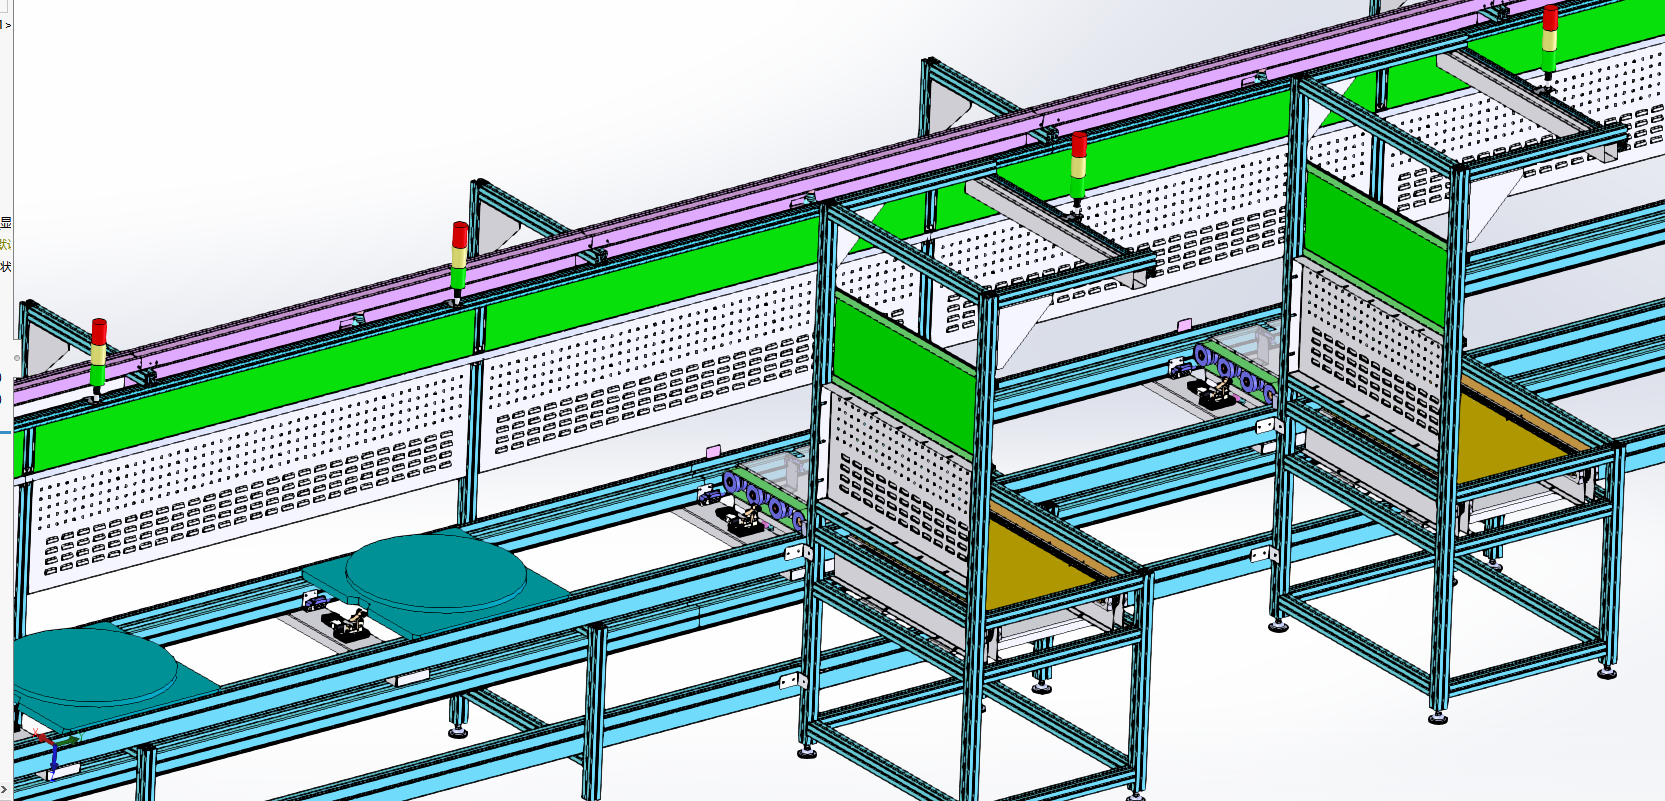 Parking lock double-speed chain assembly line design by Solidworks